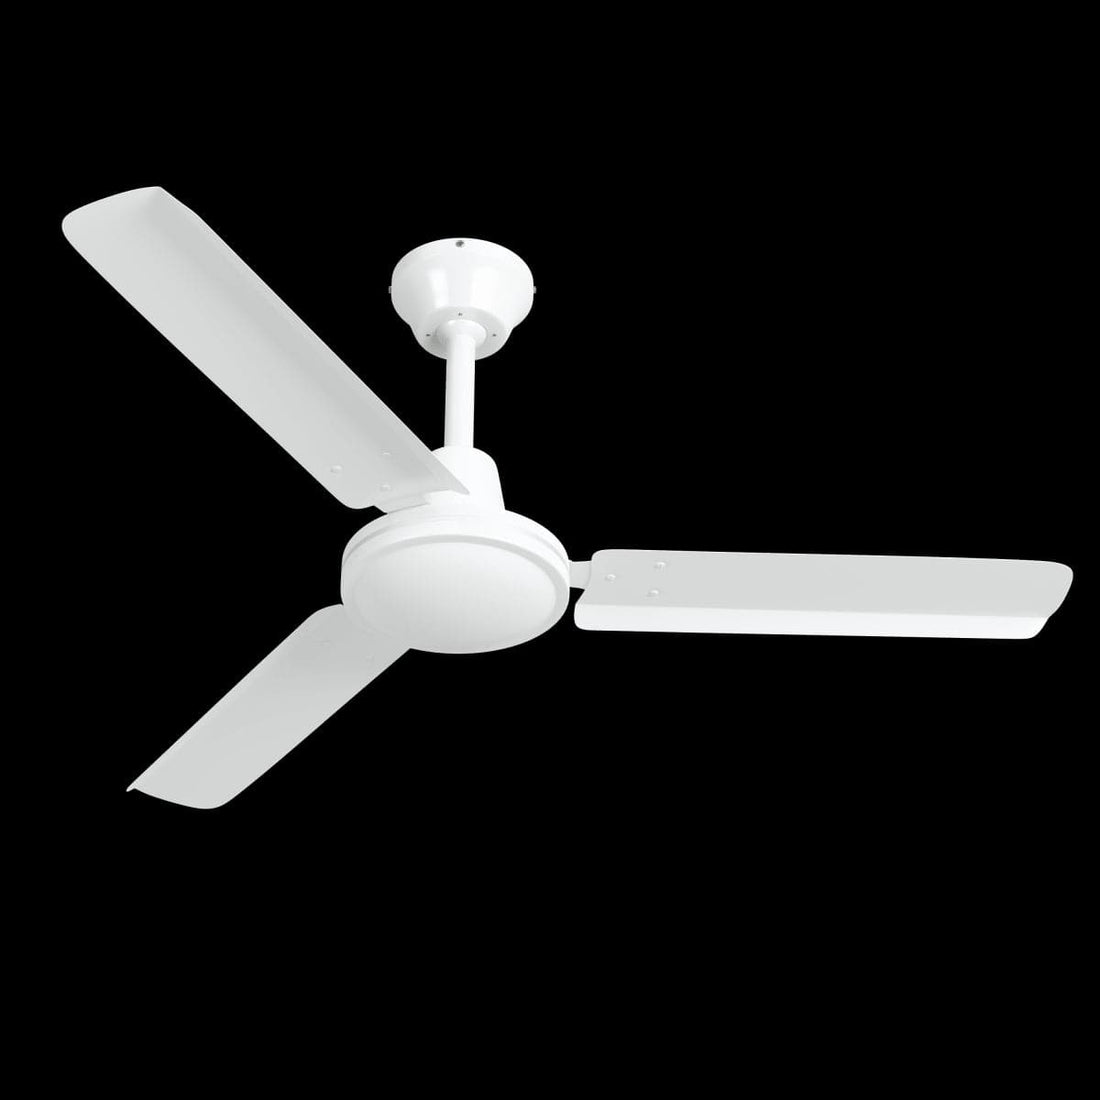 SAIPAN CEILING FAN 3 BLADES D91 WITHOUT LIGHT WHITE - best price from Maltashopper.com BR420004304